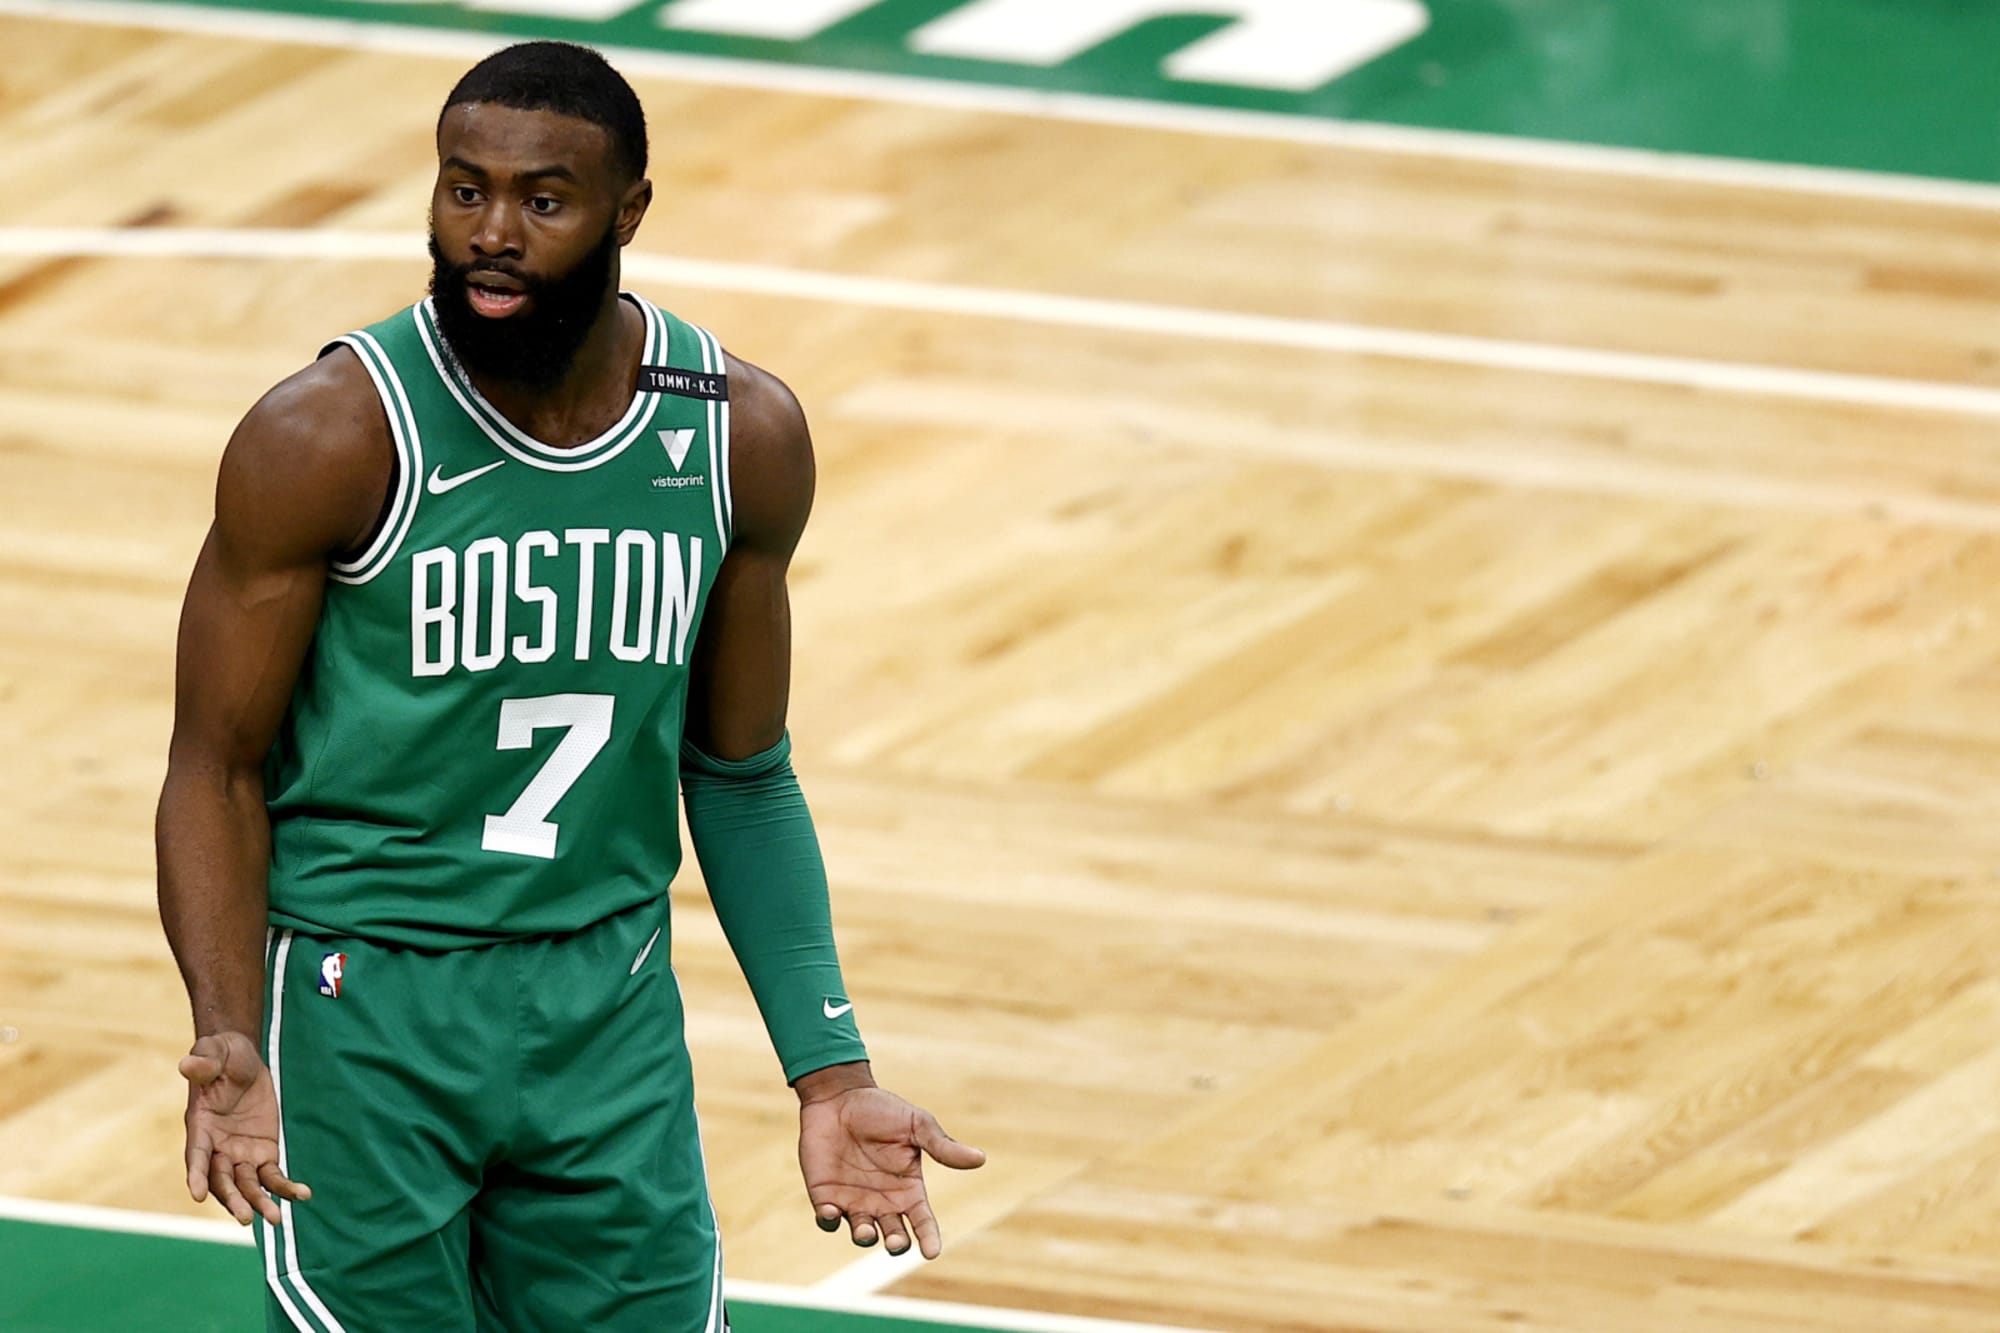 NBA Injury Report: Boston Celtics Star Jaylen Brown Exits With Ankle Injury